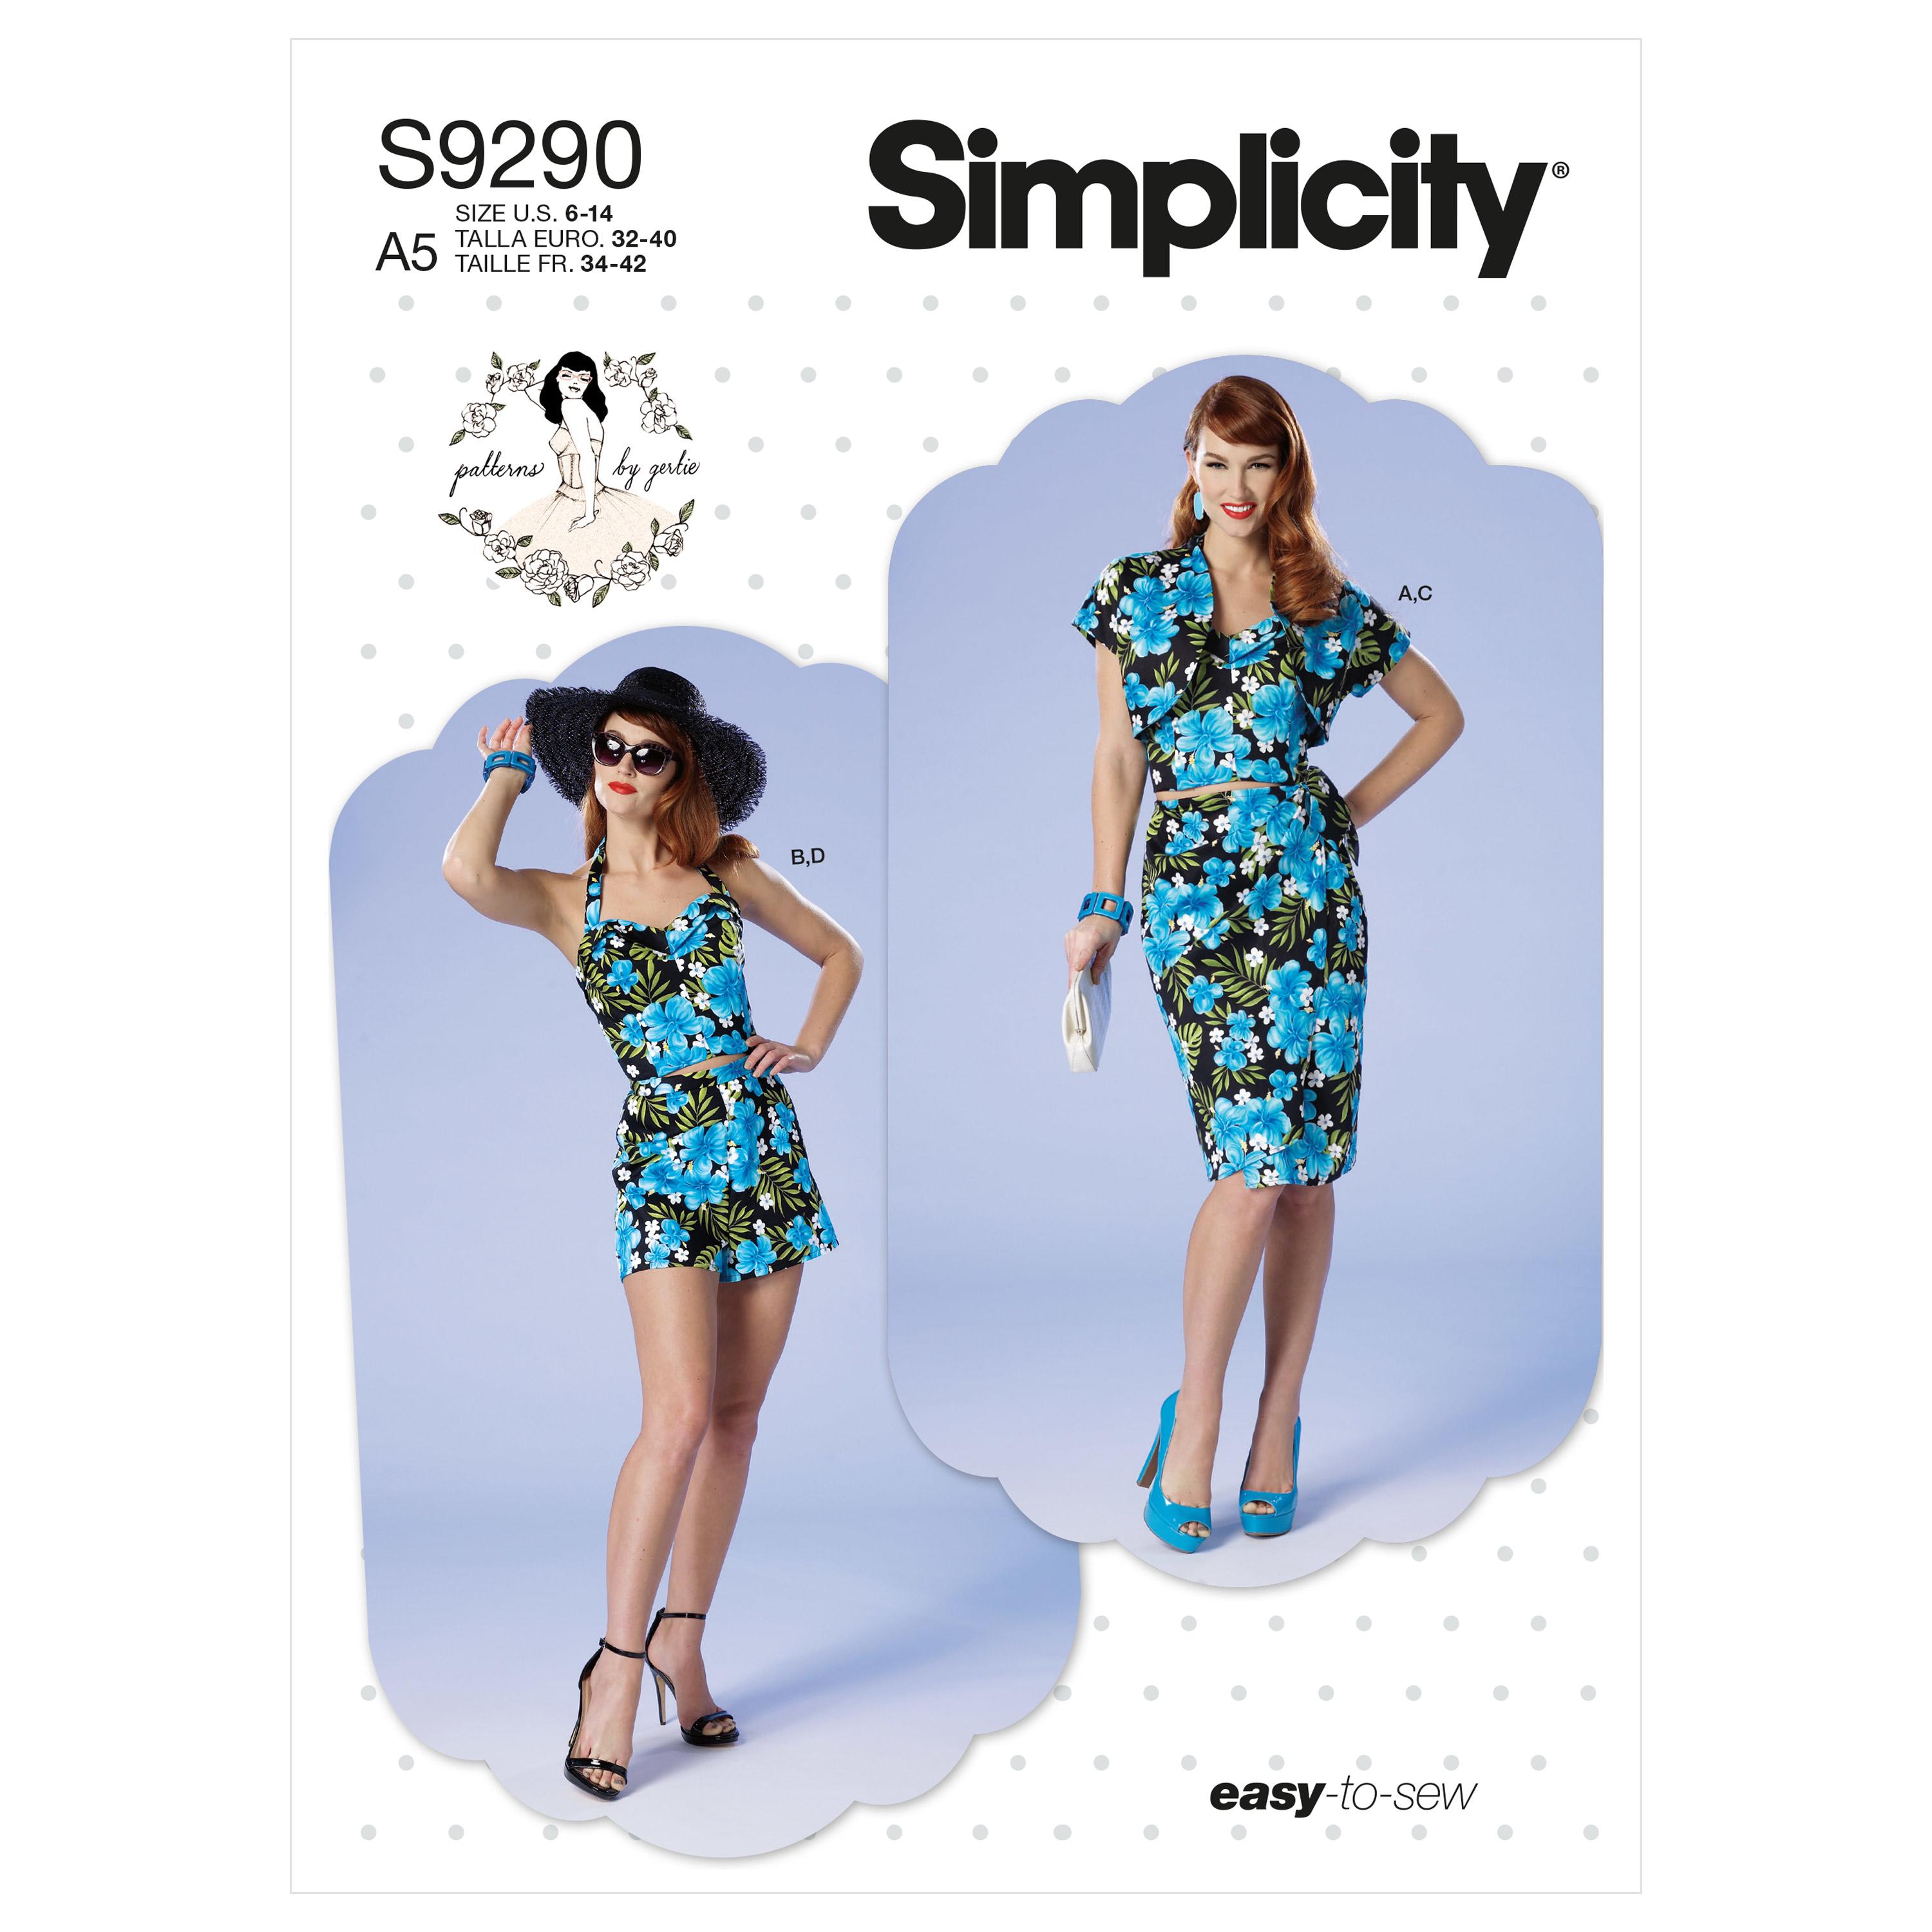 Simplicity Sewing Pattern S9290 Misses' & Misses' Petite Bolero, Bustier, Sarong & Shorts